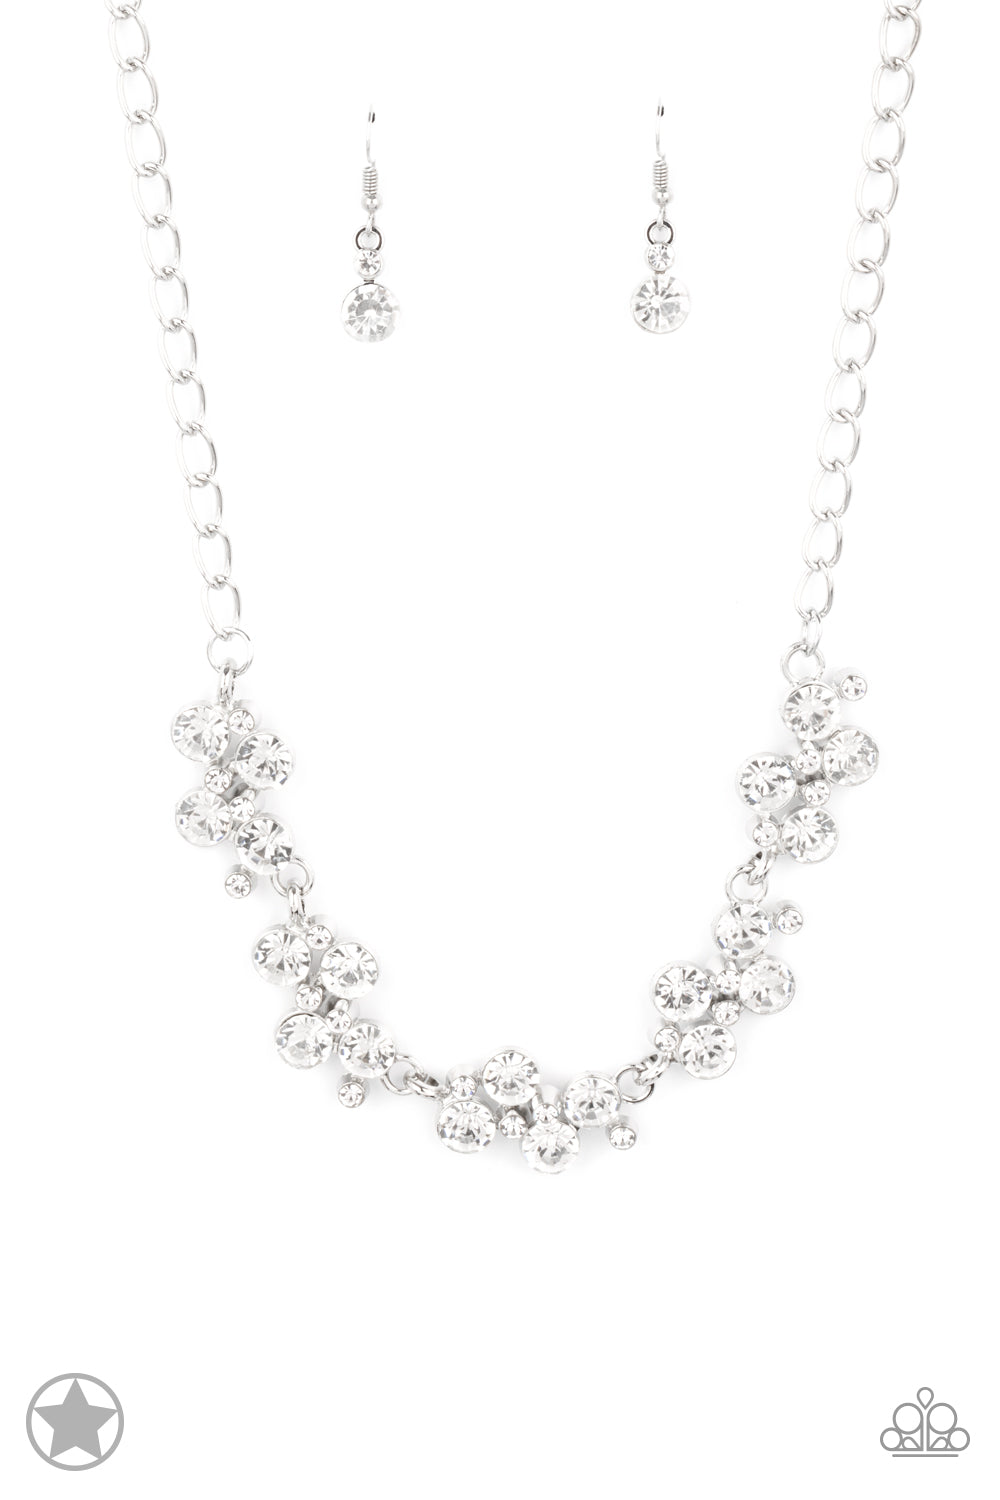 Hollywood Hills - White necklace B093